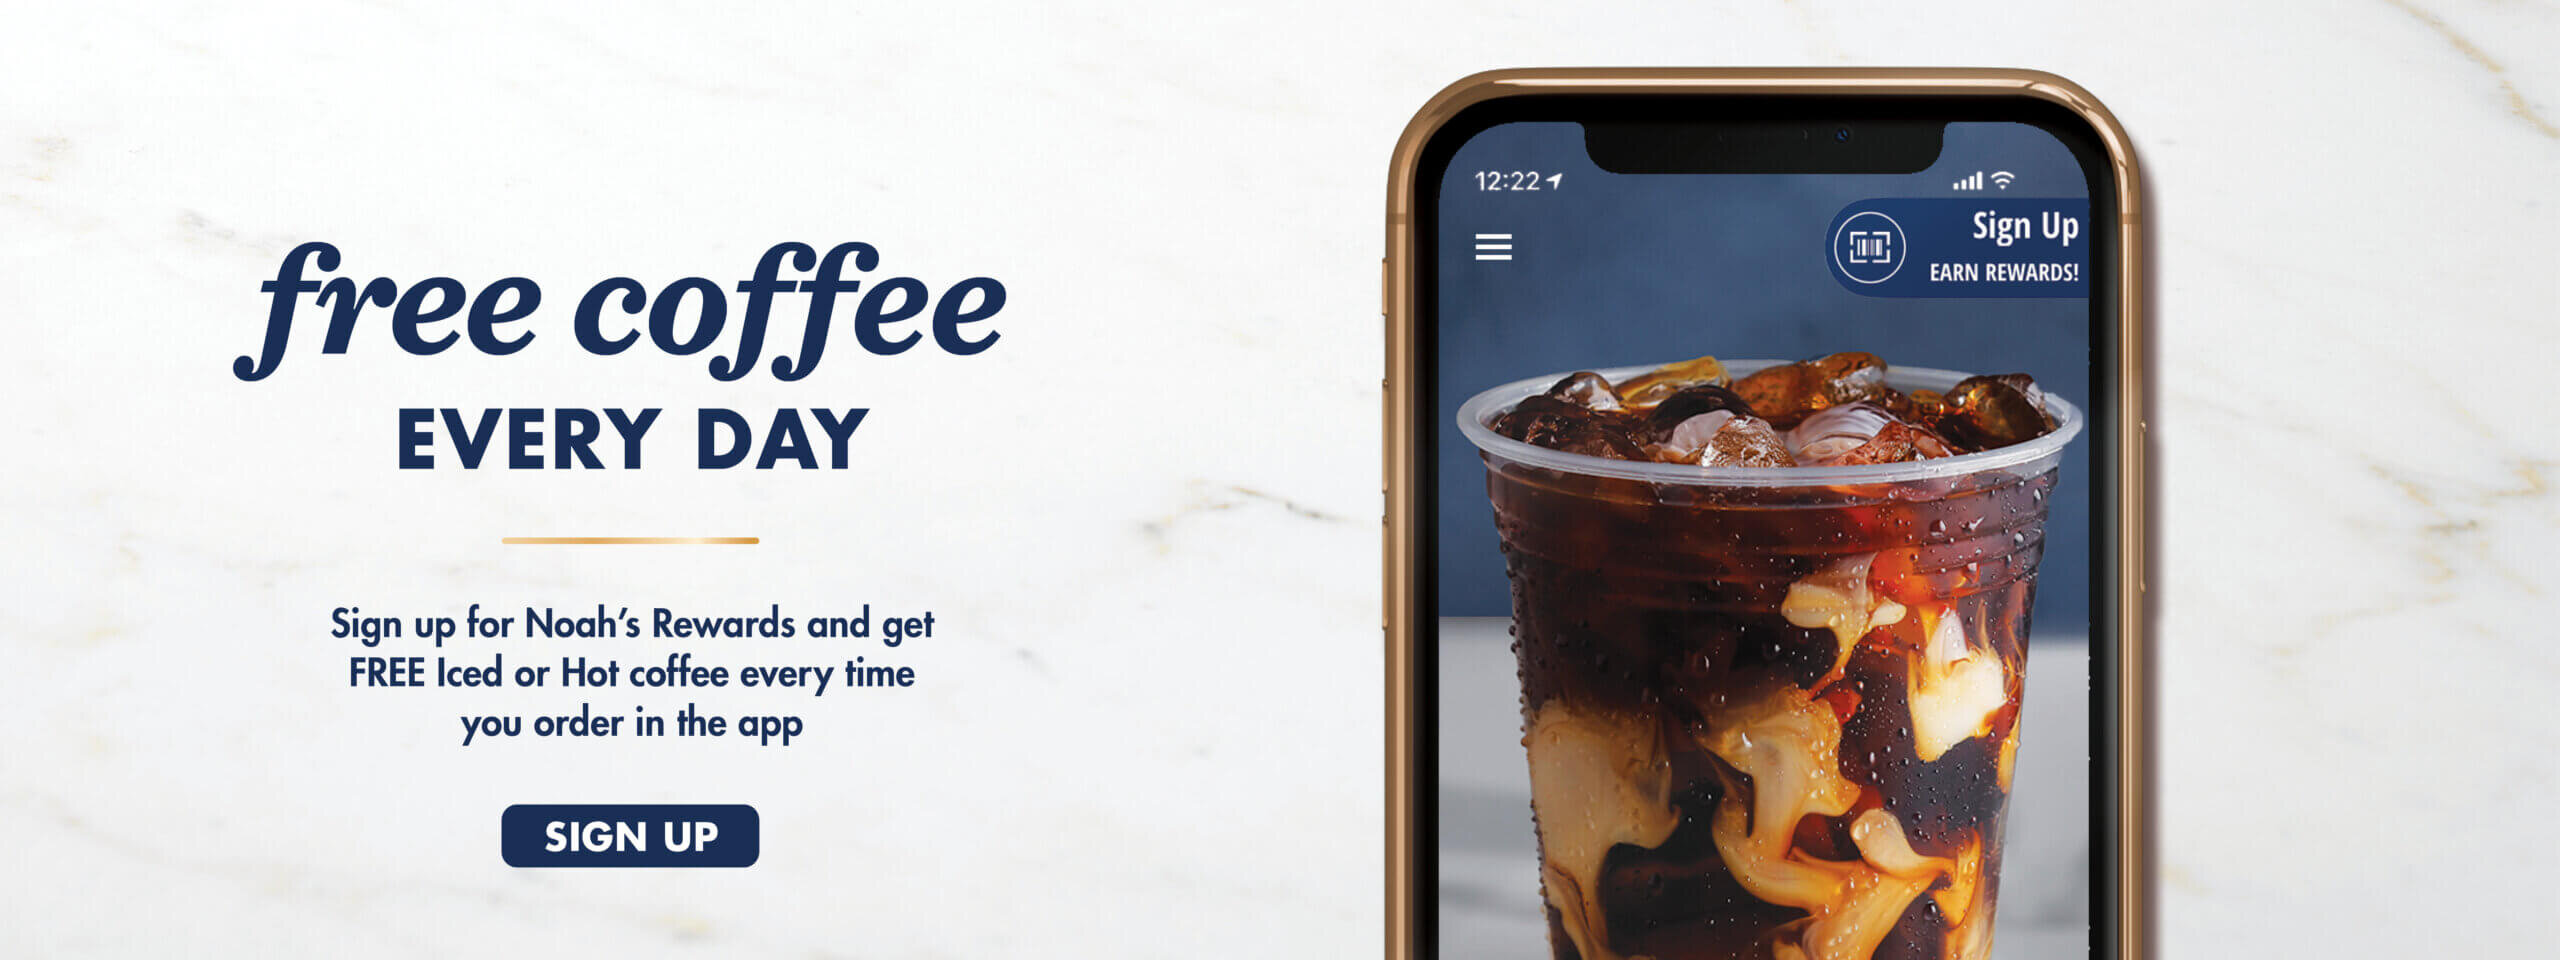 Free coffee every day. Click to sign up for Noah's Rewards and get free iced or hot coffee every time you order in the app.